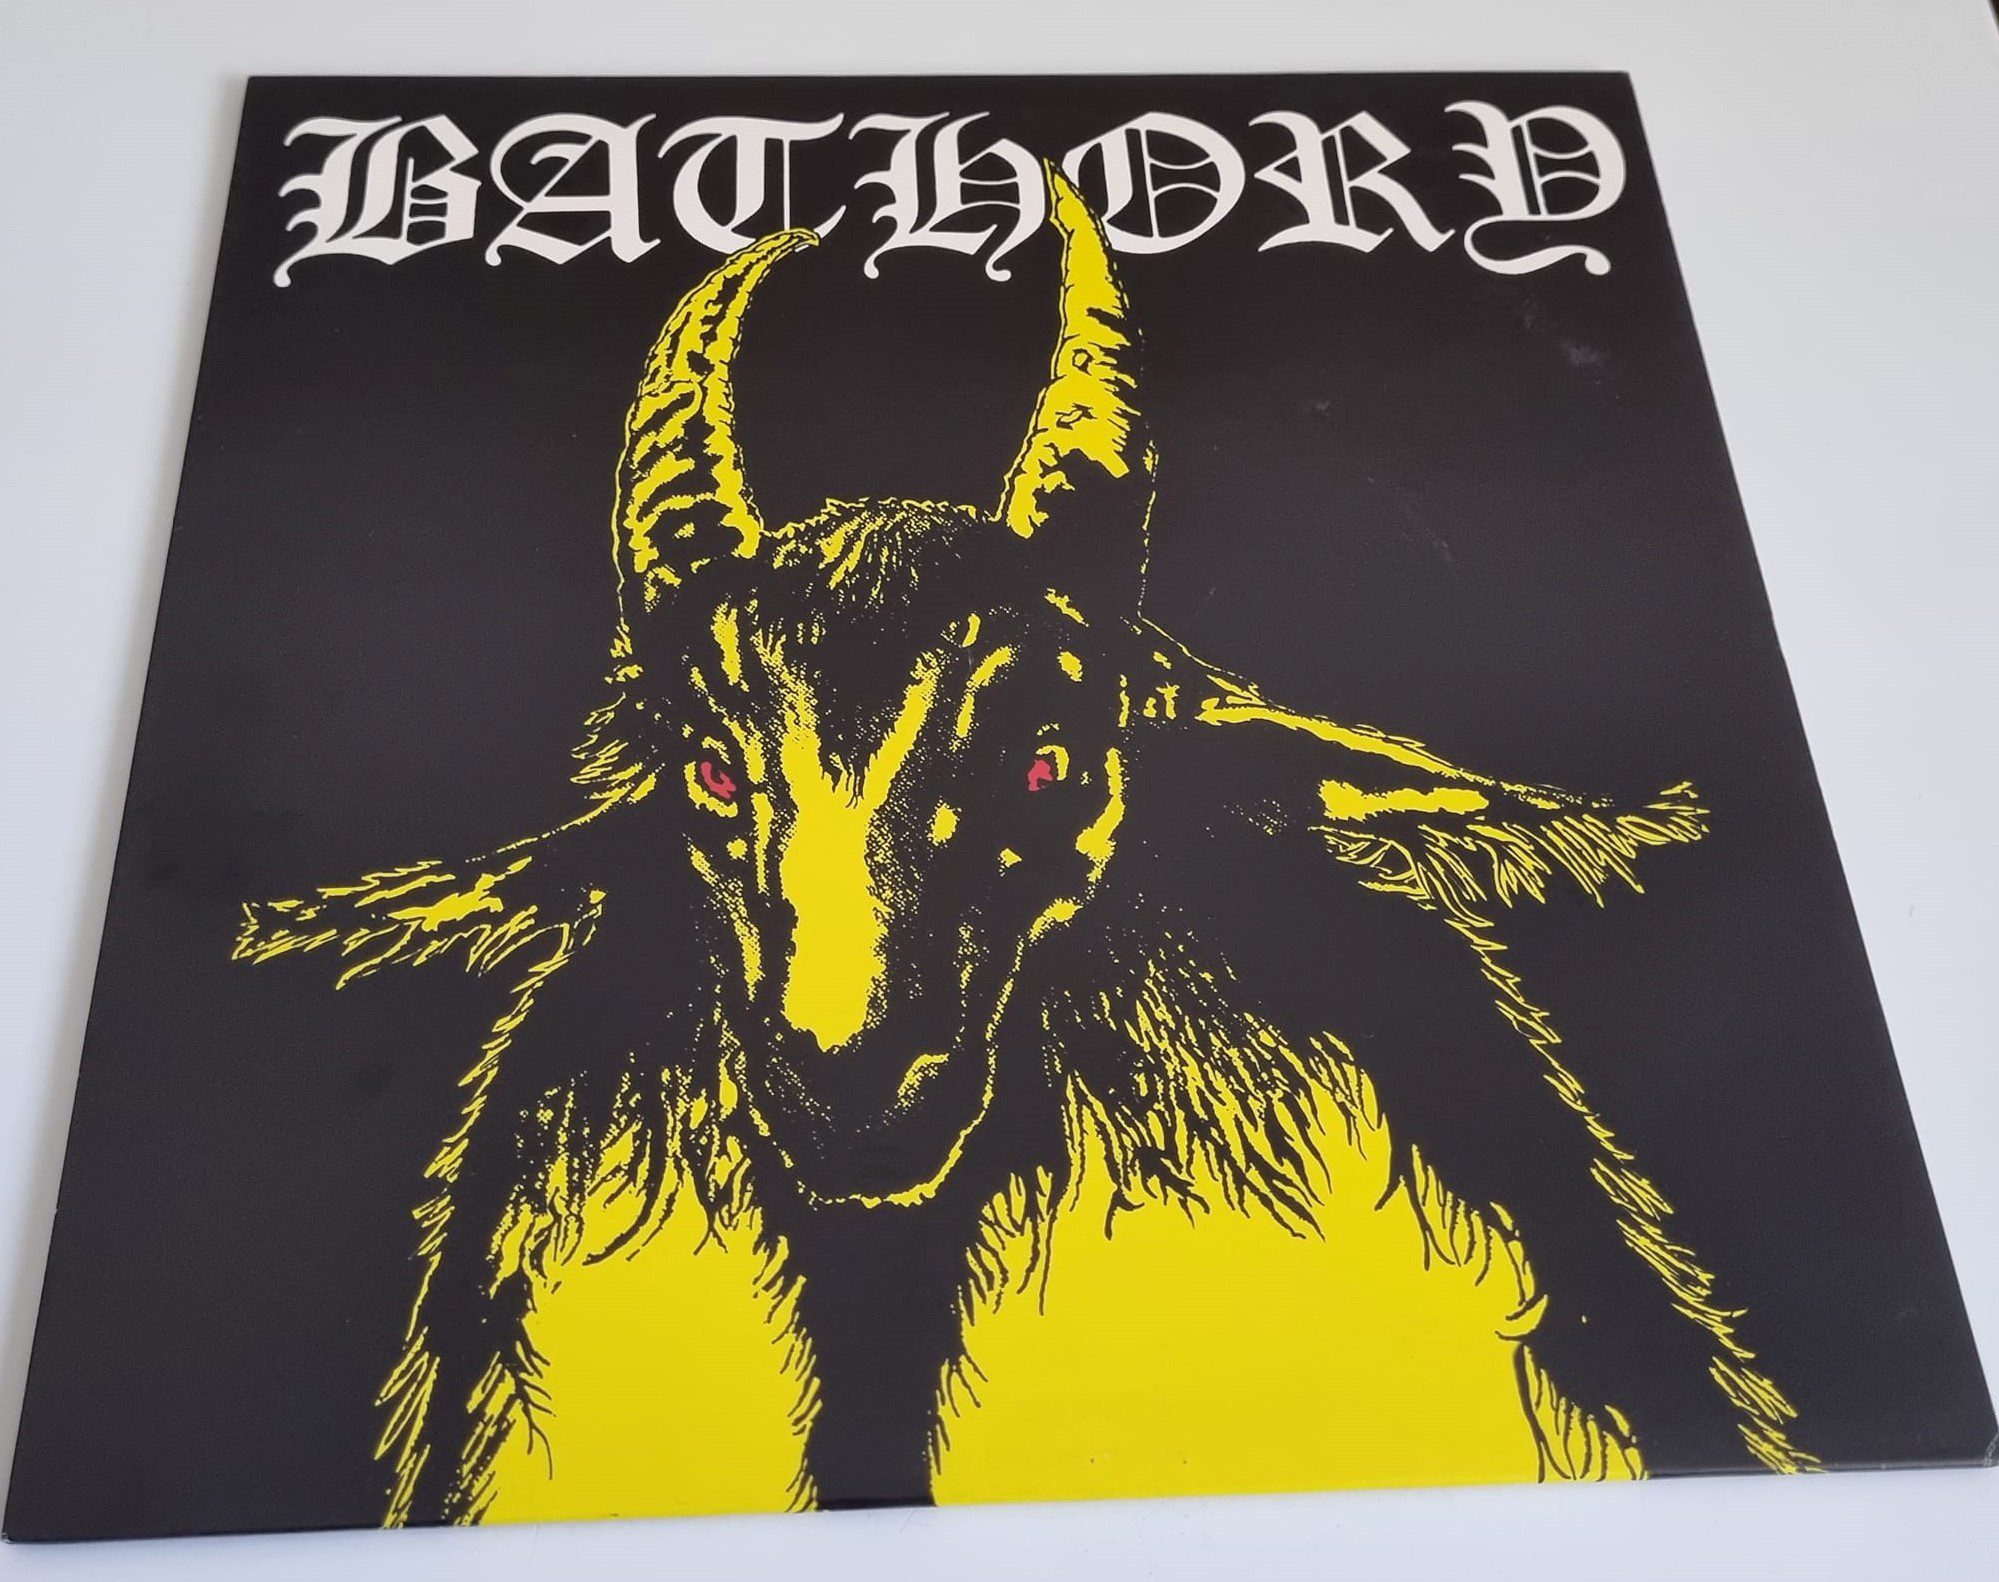 Buy this rare Bathory record by clicking here